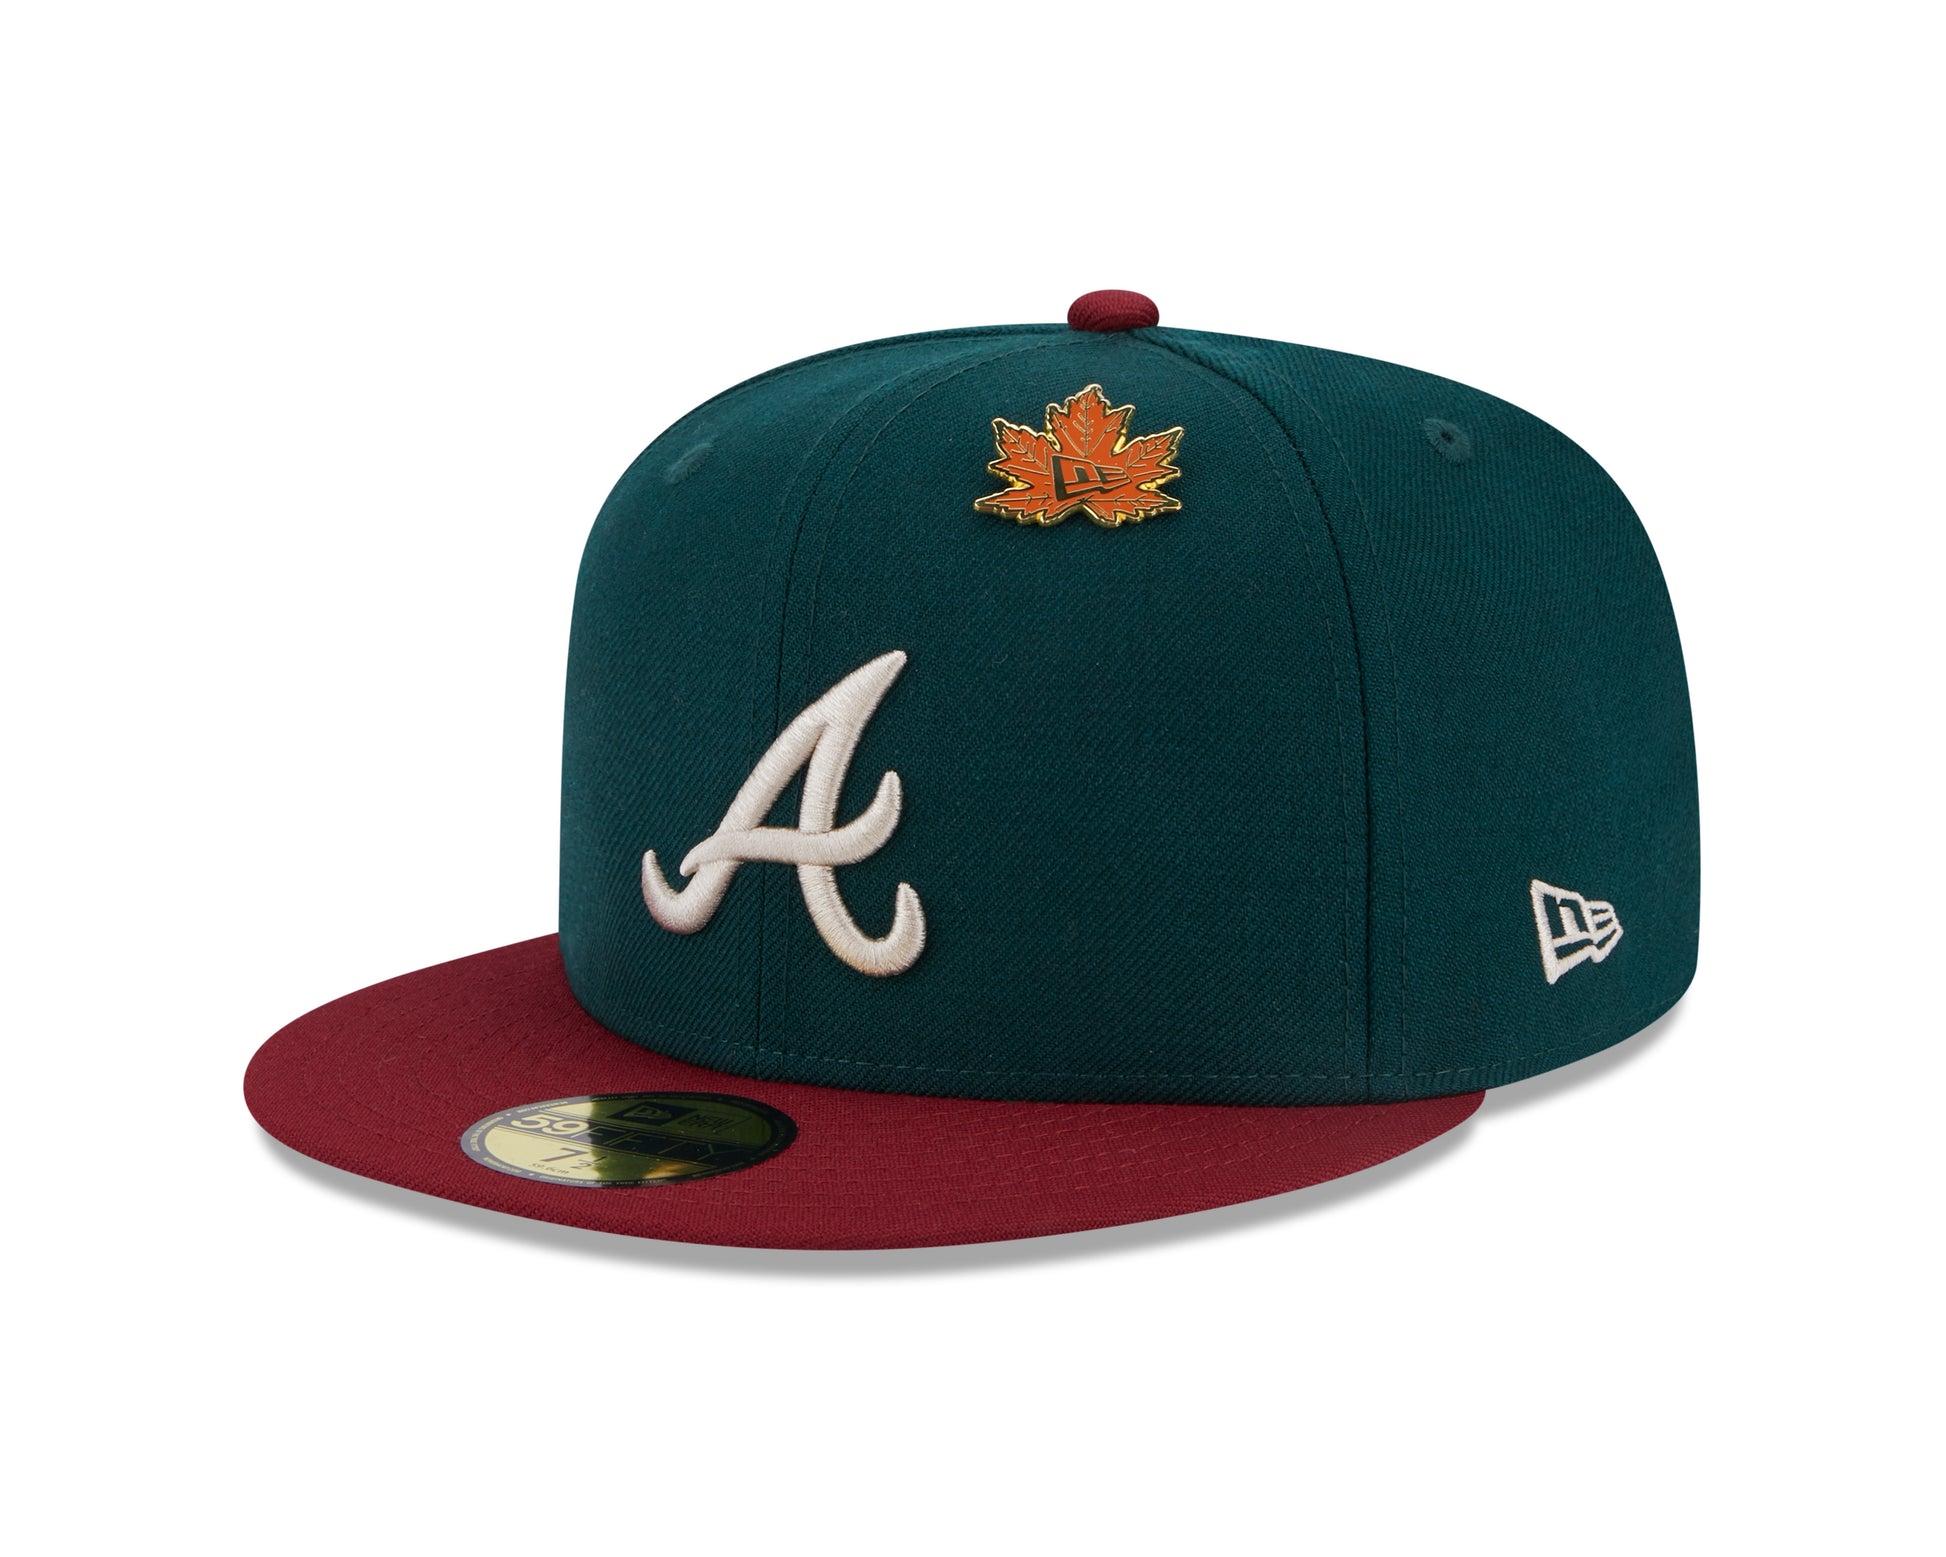 New Era - MLB WS Contrast 59Fifty Fitted - Atlanta Braves - Green/Red - Headz Up 